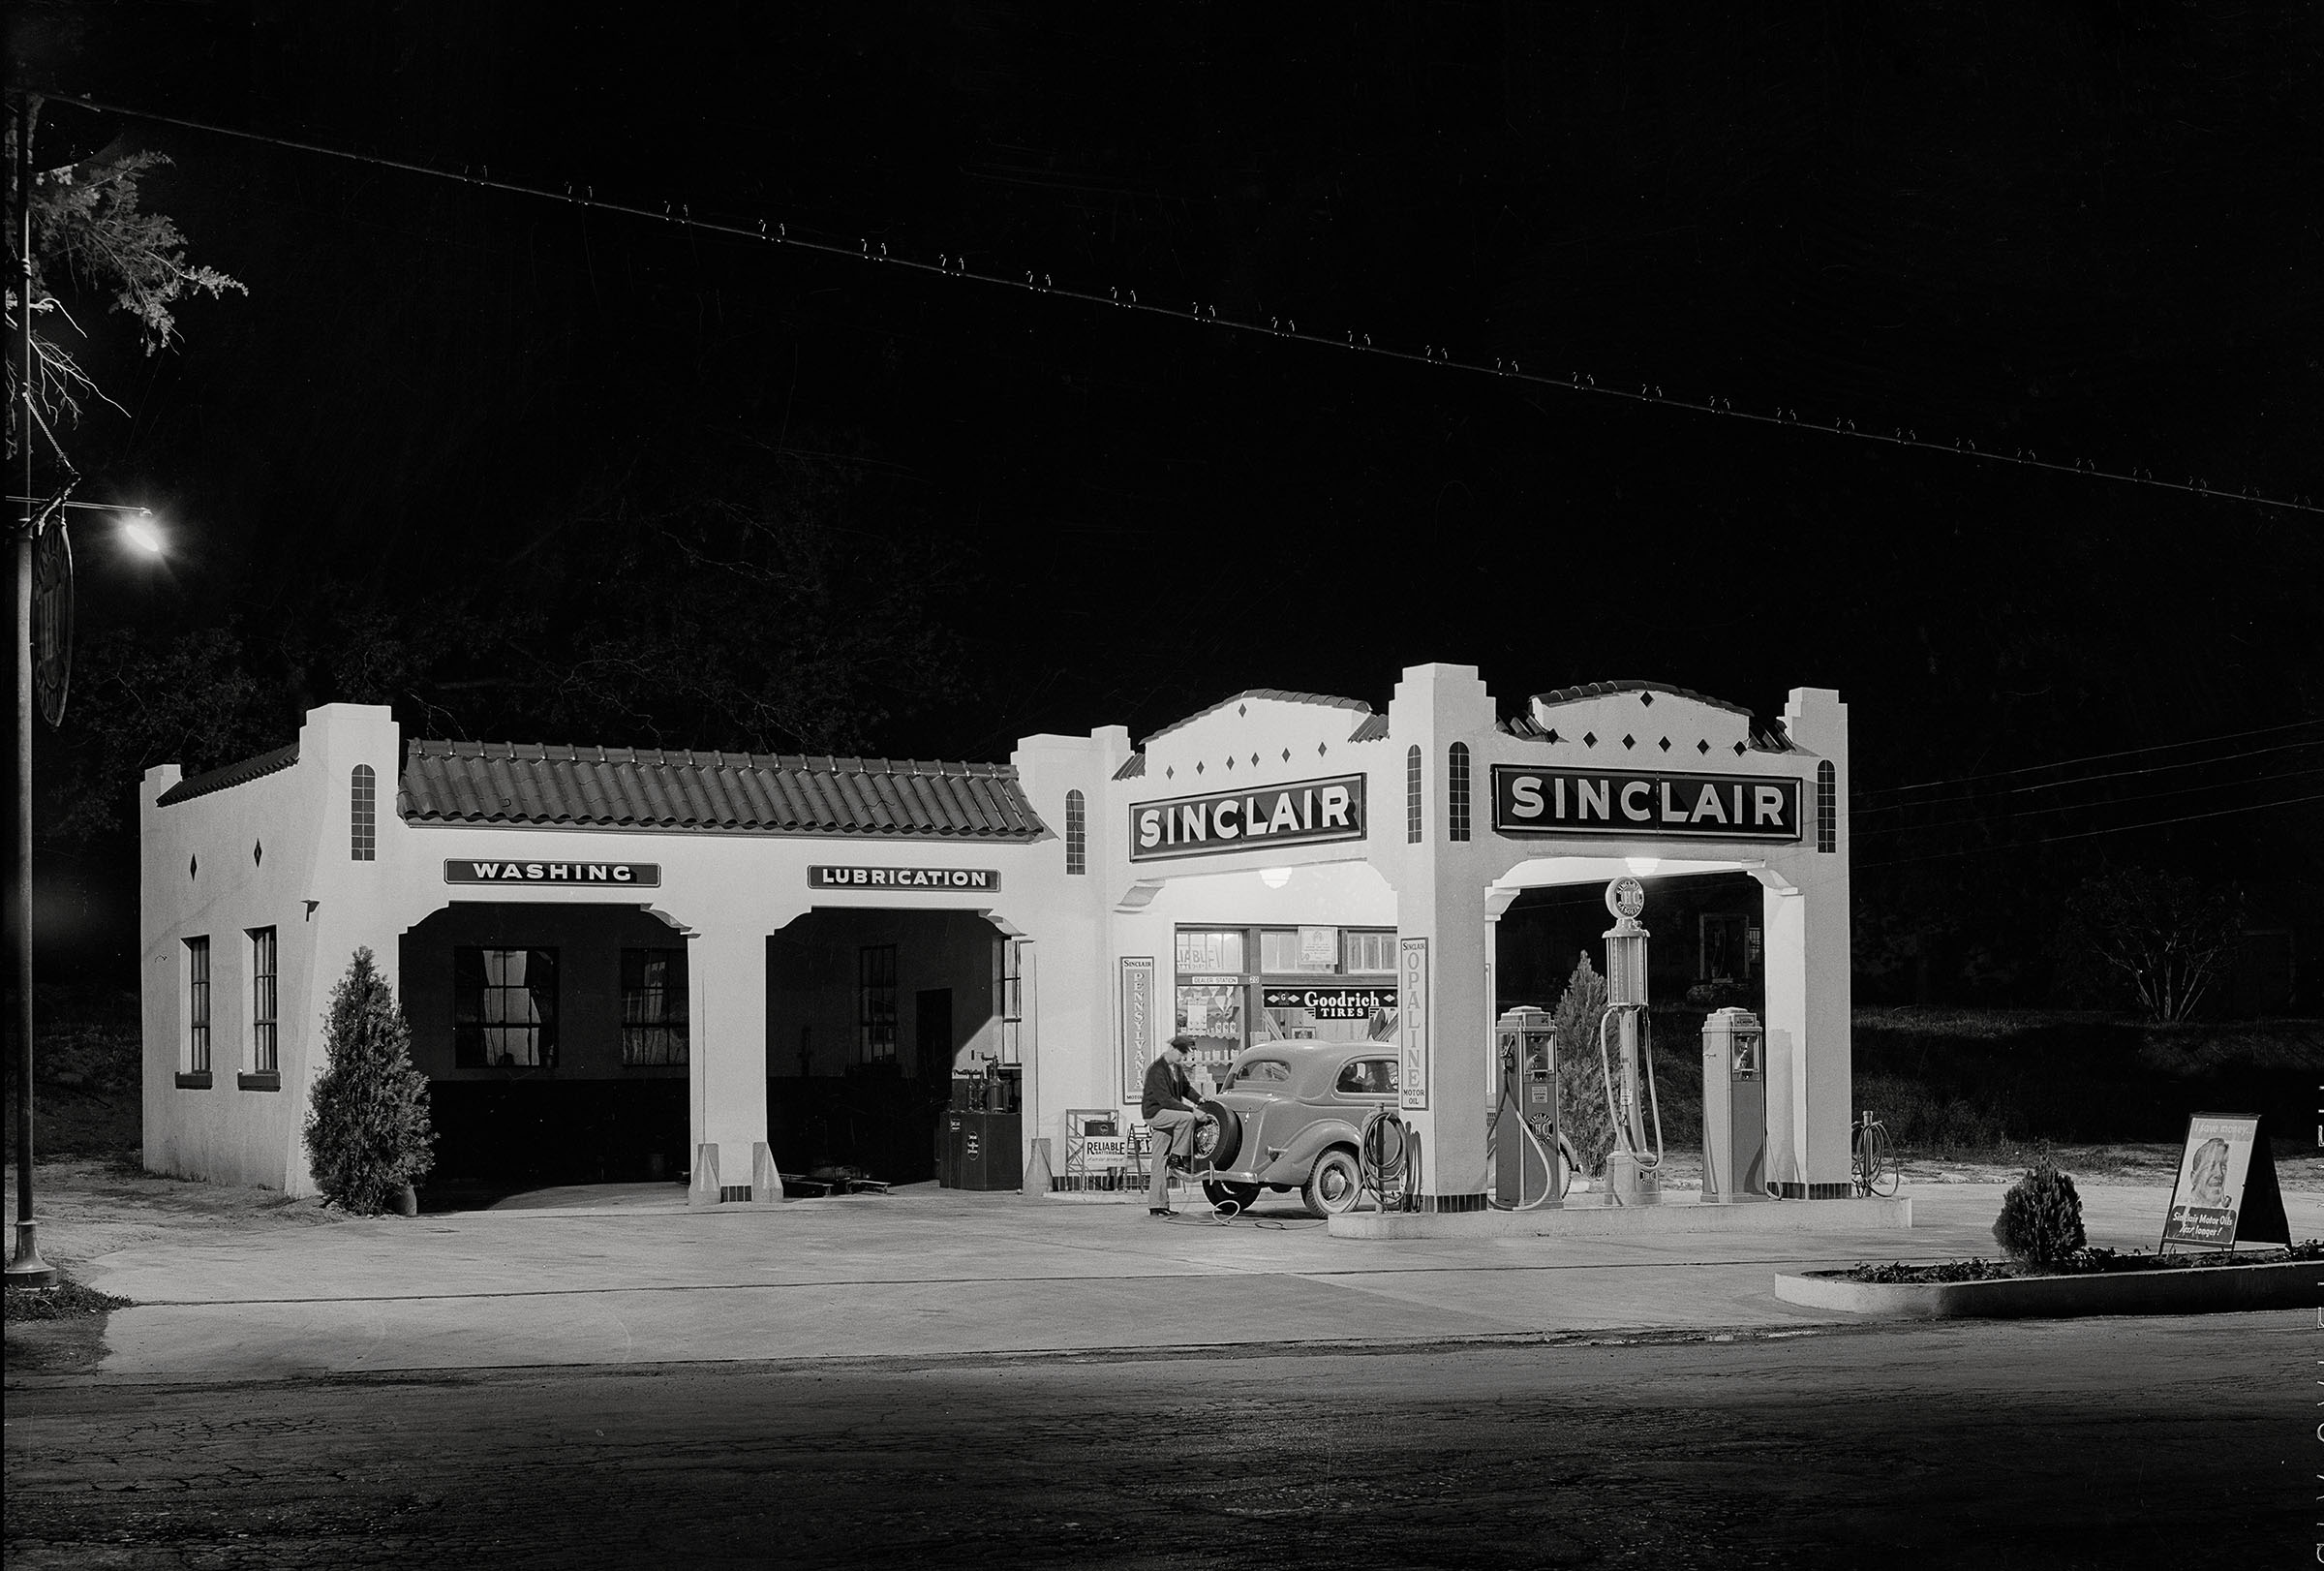 Vintage photo of a Sinclair Station with a man pumping gas